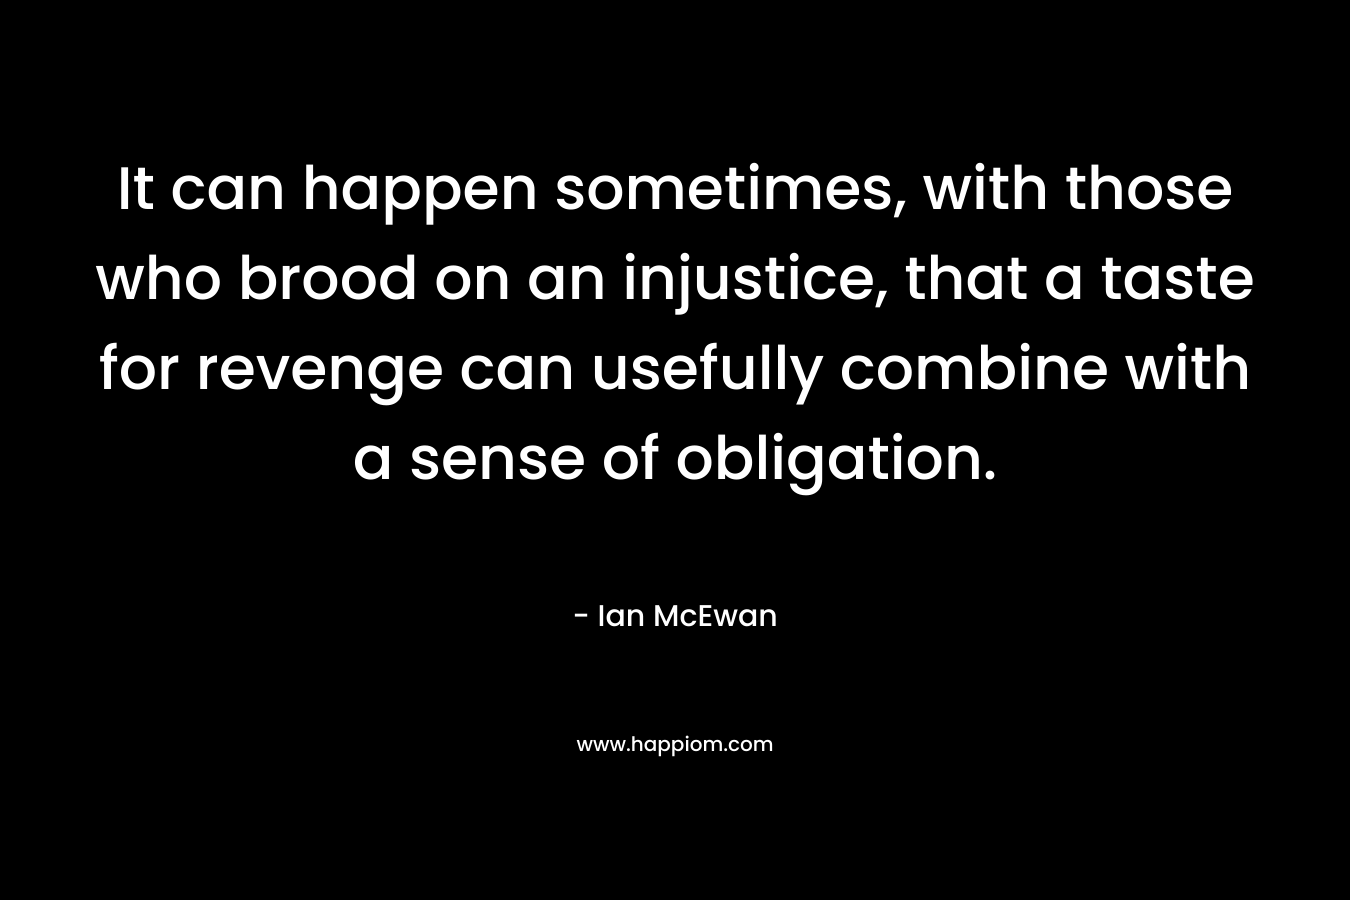 It can happen sometimes, with those who brood on an injustice, that a taste for revenge can usefully combine with a sense of obligation. – Ian McEwan